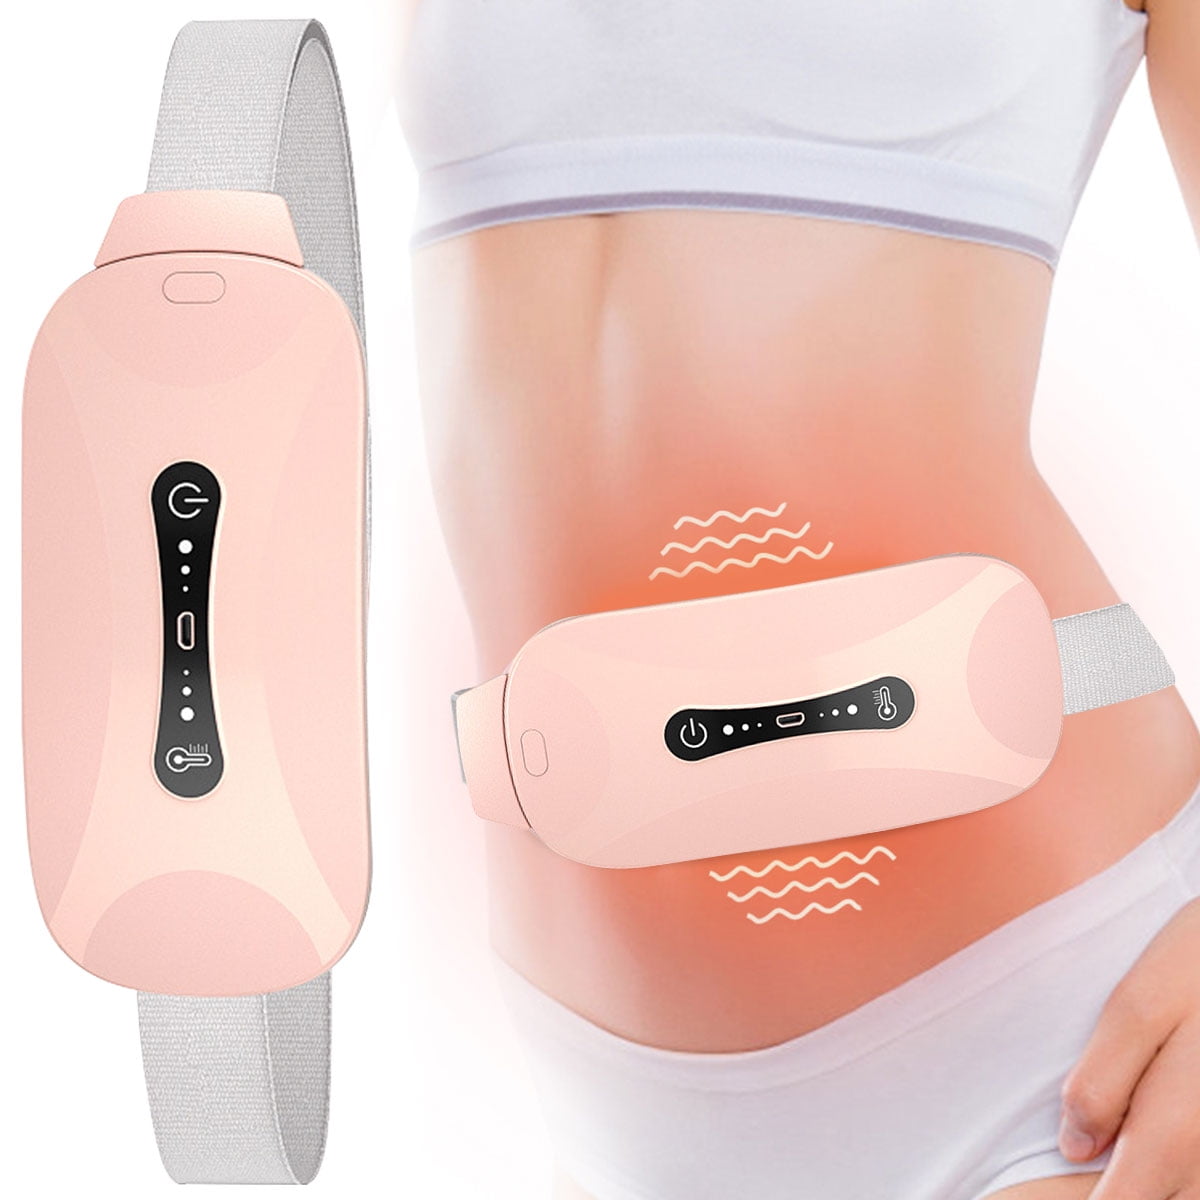 Period Heating Pad for Cramps-Portable Cordless Vibrating Menstrual Heating  Pads,Electric Small USB Heat Pad,Waist Belt Wearable Period Pain Simulator  for Cramp/Back Pain Relief,Gifts for Women Girl Pink2